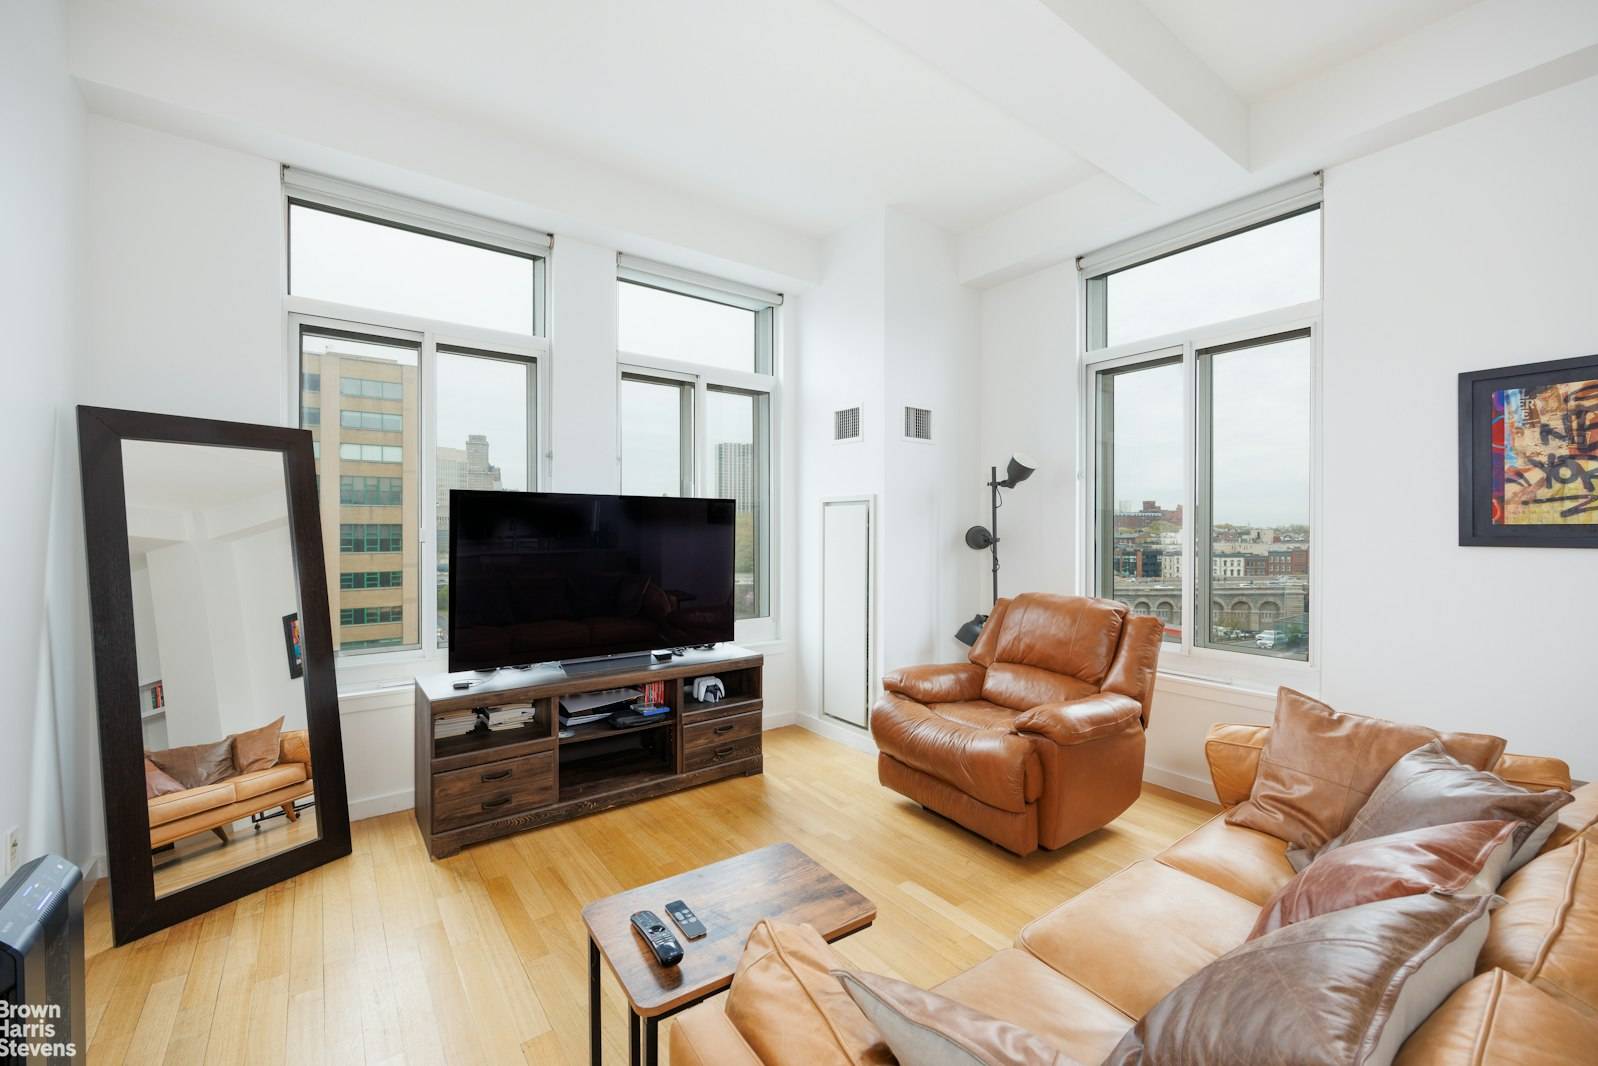 Elegant amp ; chic this thoughtfully designed two bedroom two bath home perfectly located in Dumbo will leave you awe struck.